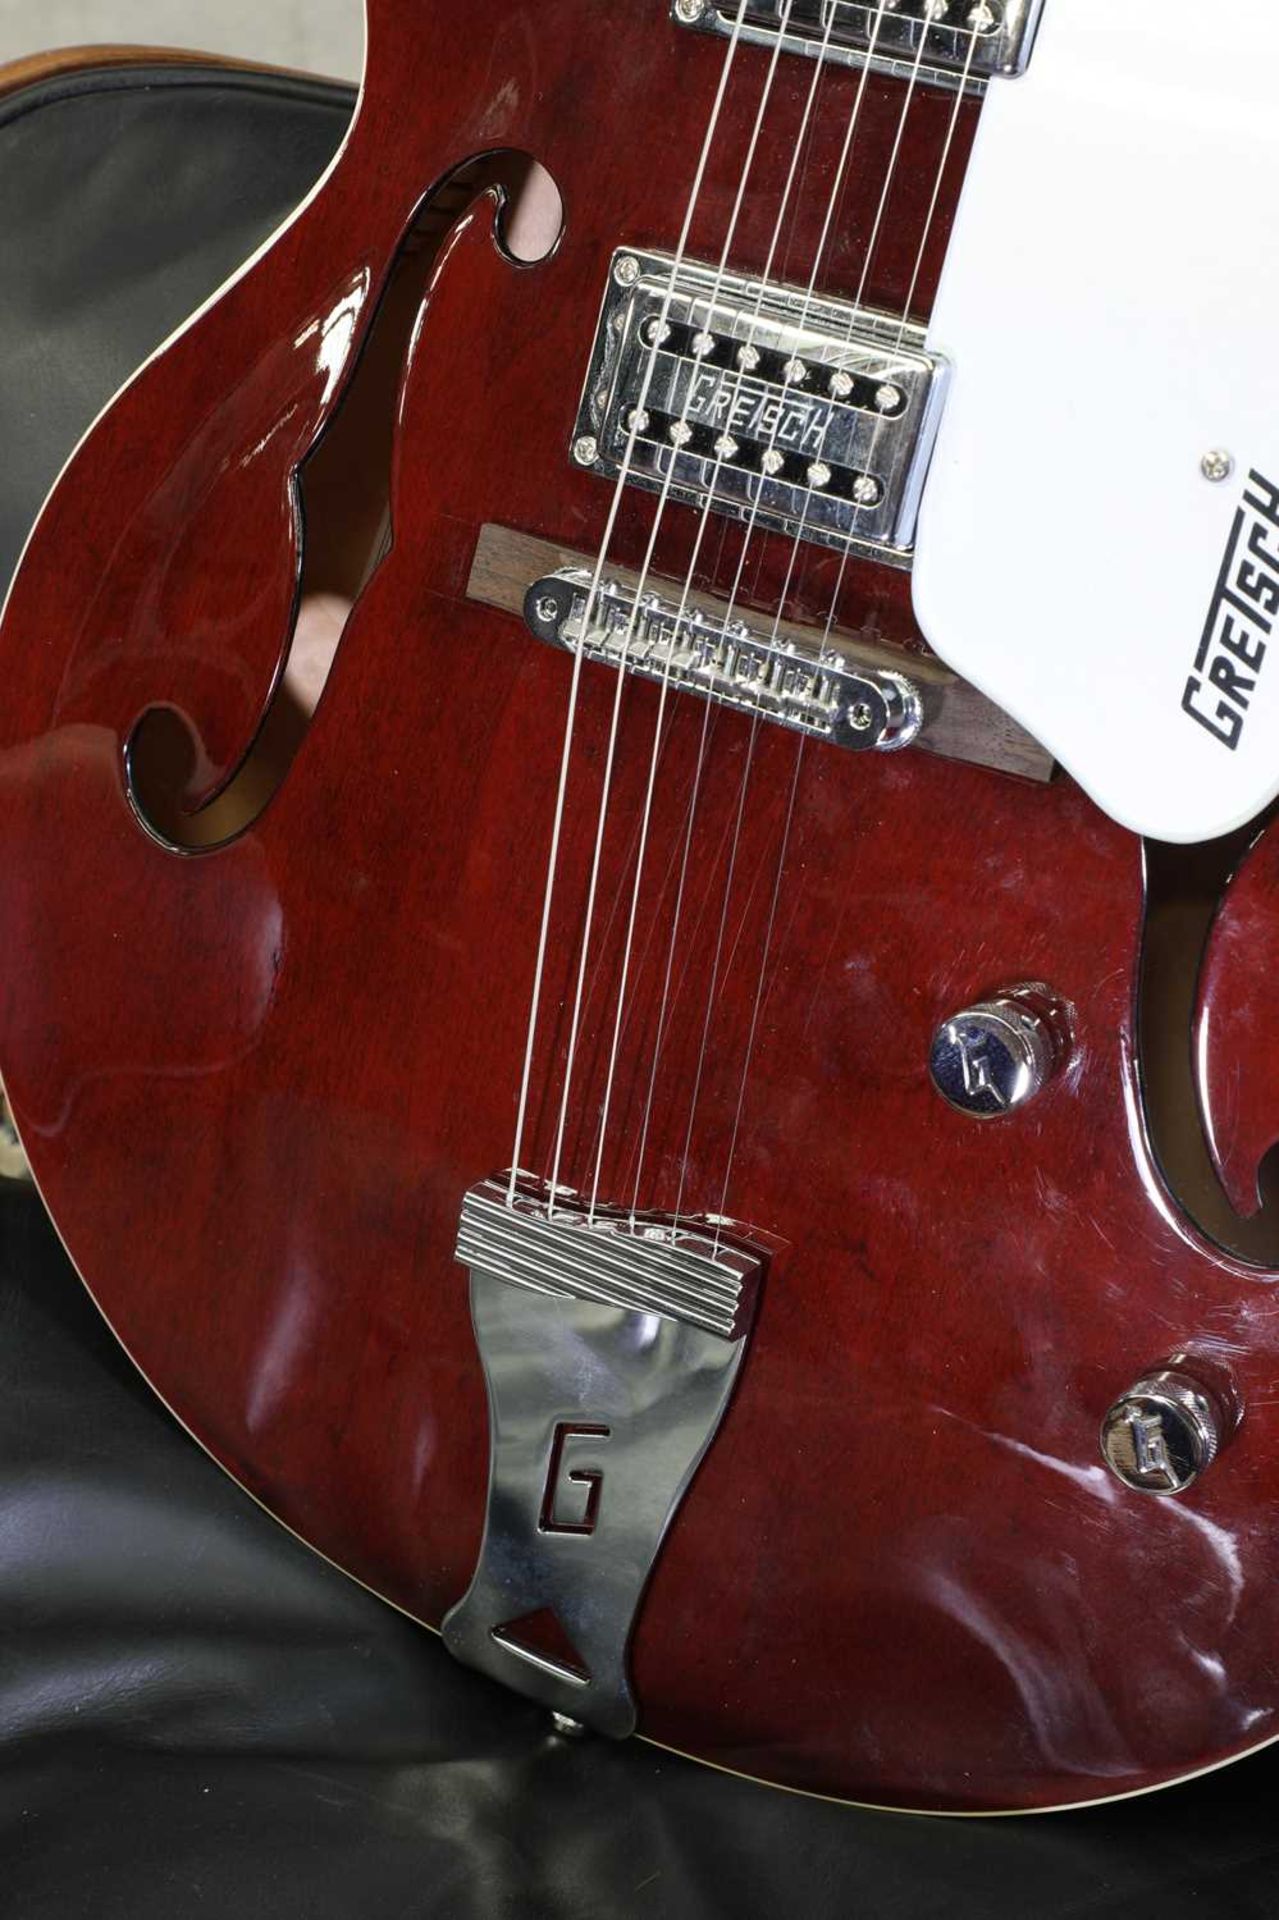 A Gretsch Electromatic semi-hollow electric guitar, - Image 5 of 8